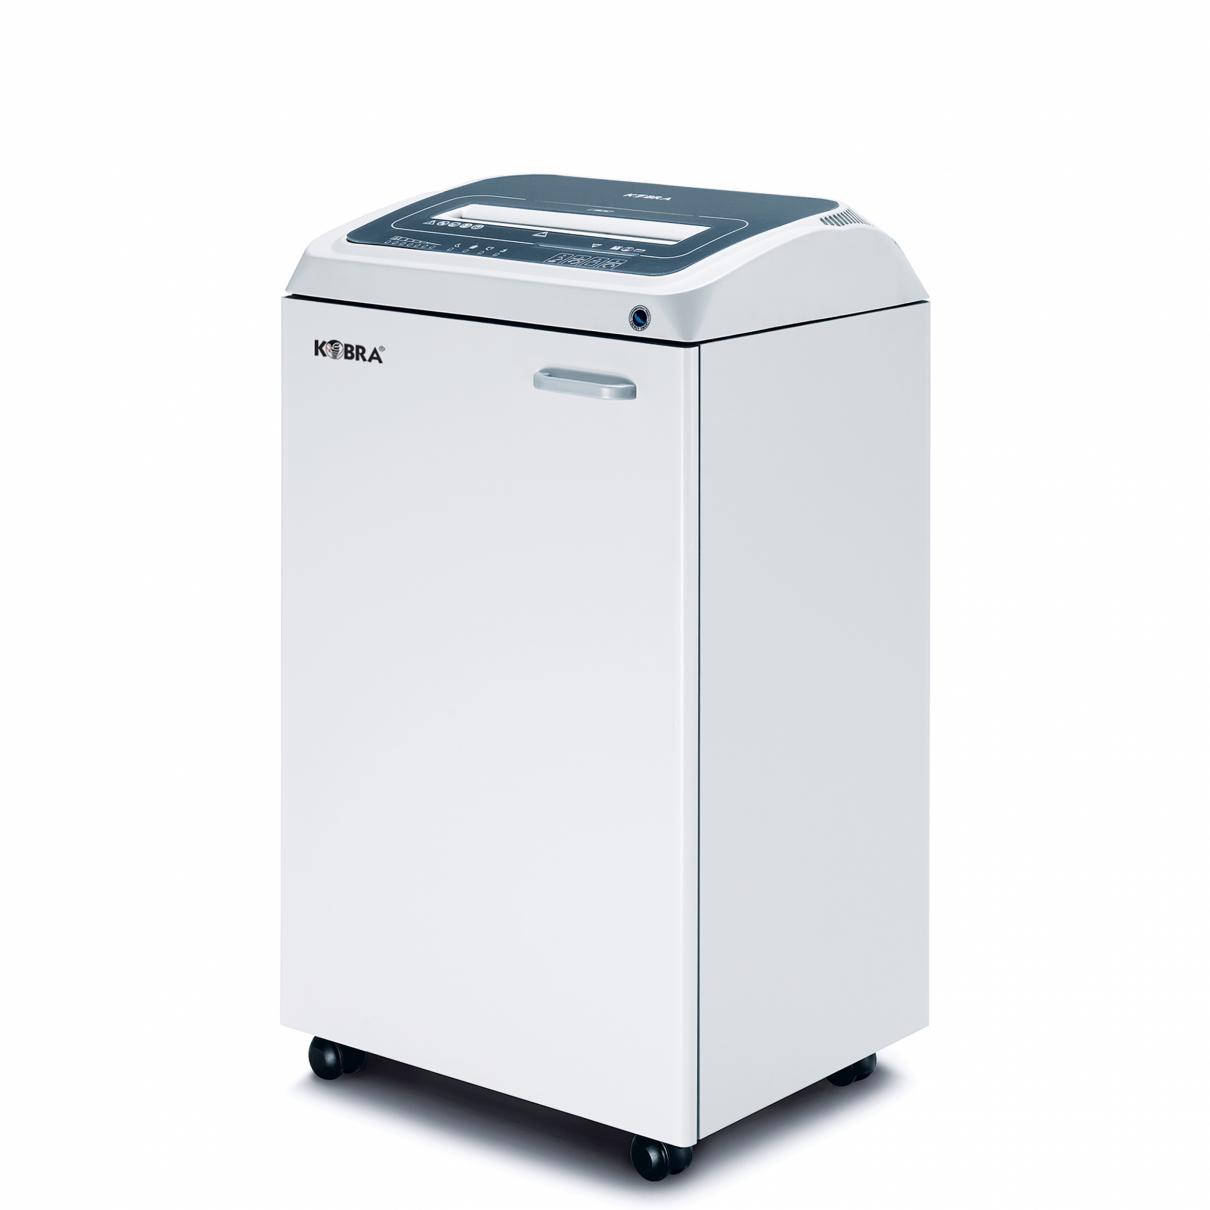 Shredder MBG 310 TS CC4 in the group All products / Shredders / Shredders security level P-4 at MBG Sweden (3042)